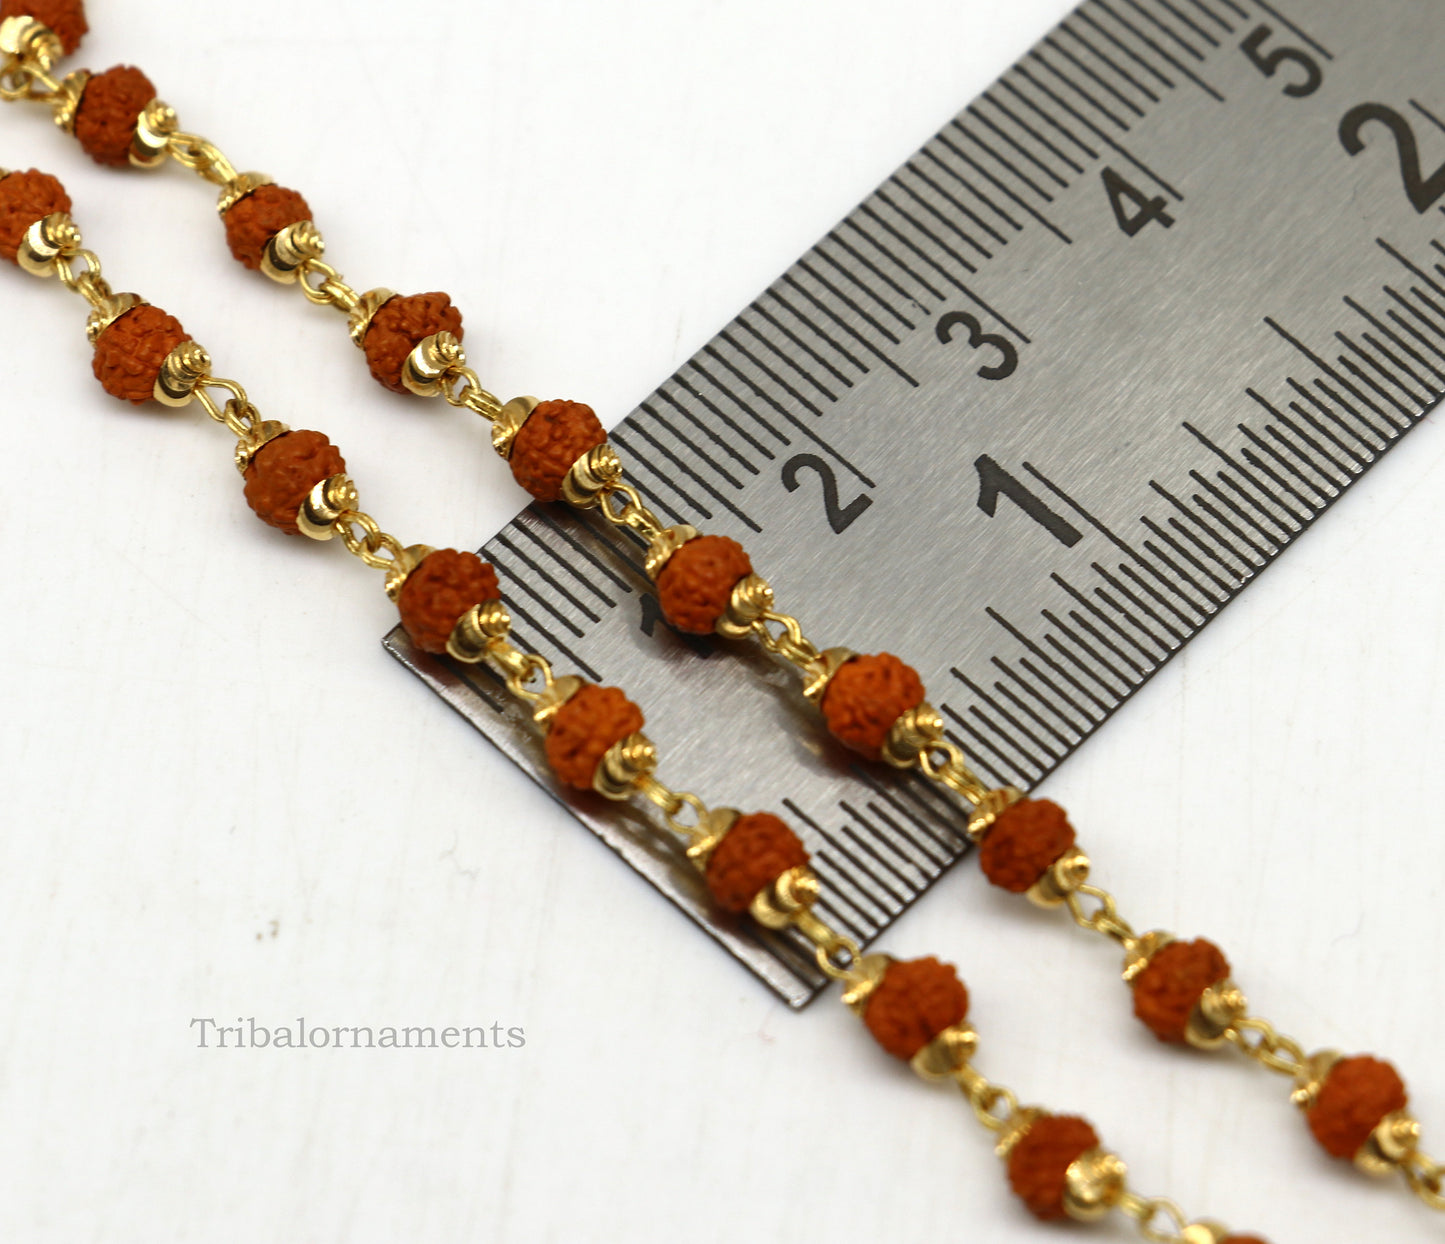 22kt yellow gold hallmarked 4 mm rudraksha chain necklace, Gorgeous design customized beaded chain, excellent wedding gifting jewelry ch262 - TRIBAL ORNAMENTS